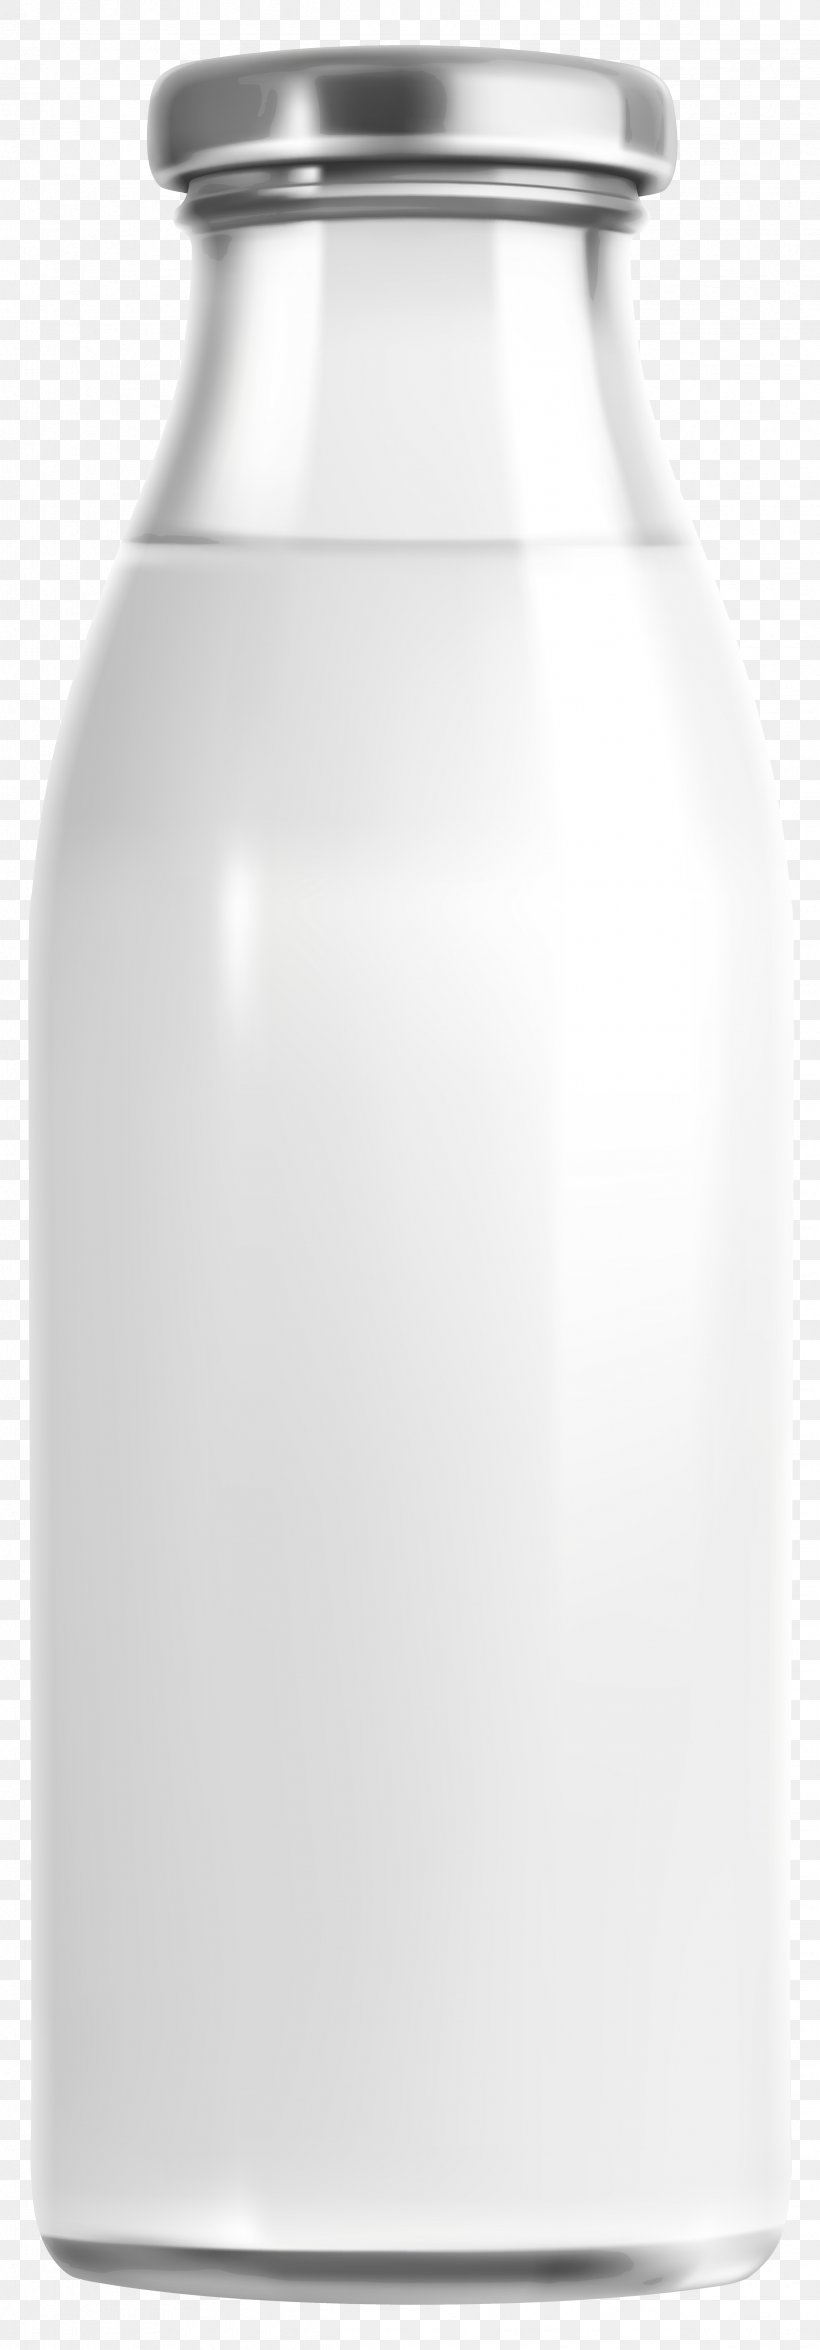 Milk Bottle Milk Bottle Clip Art, PNG, 2442x7000px, Milk, Bottle, Dairy Products, Drink, Food Storage Containers Download Free